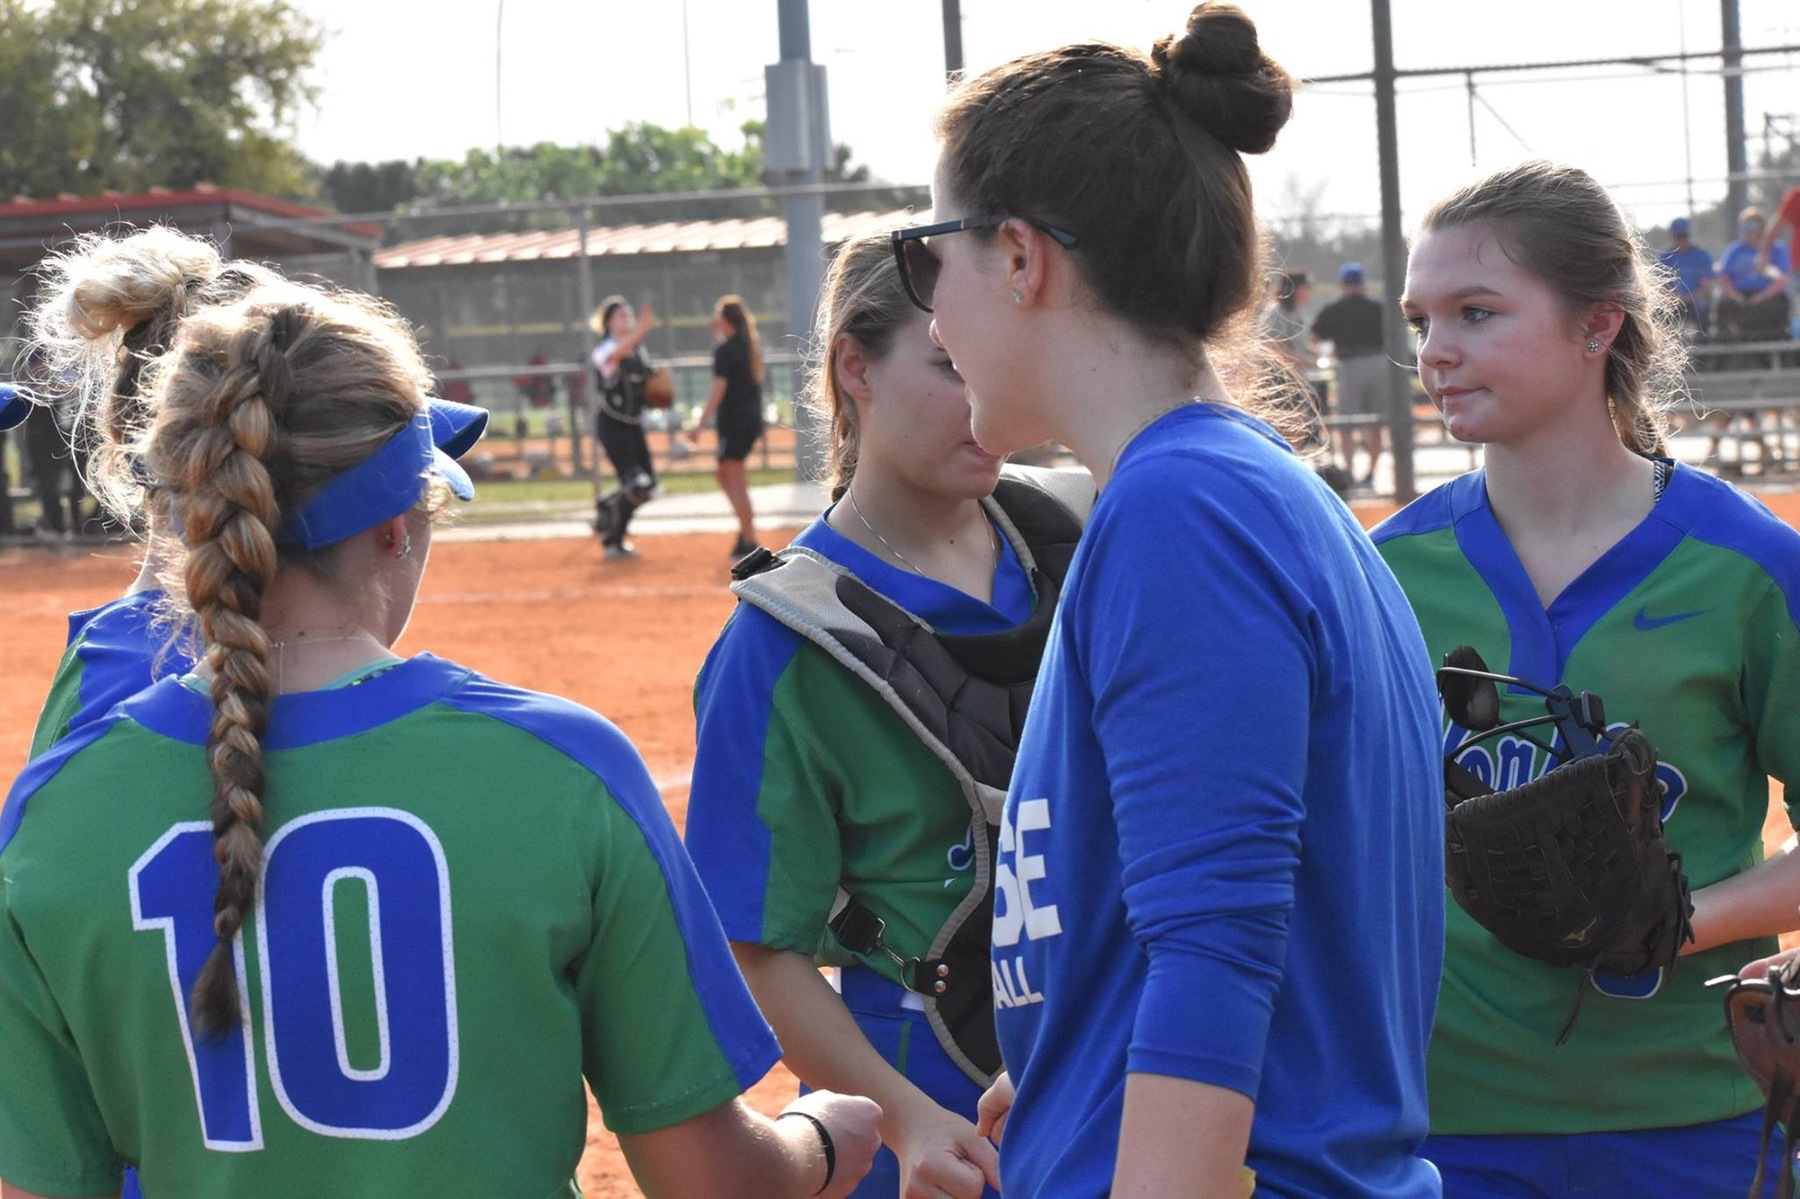 Heidi Charon talks with several players in between innings